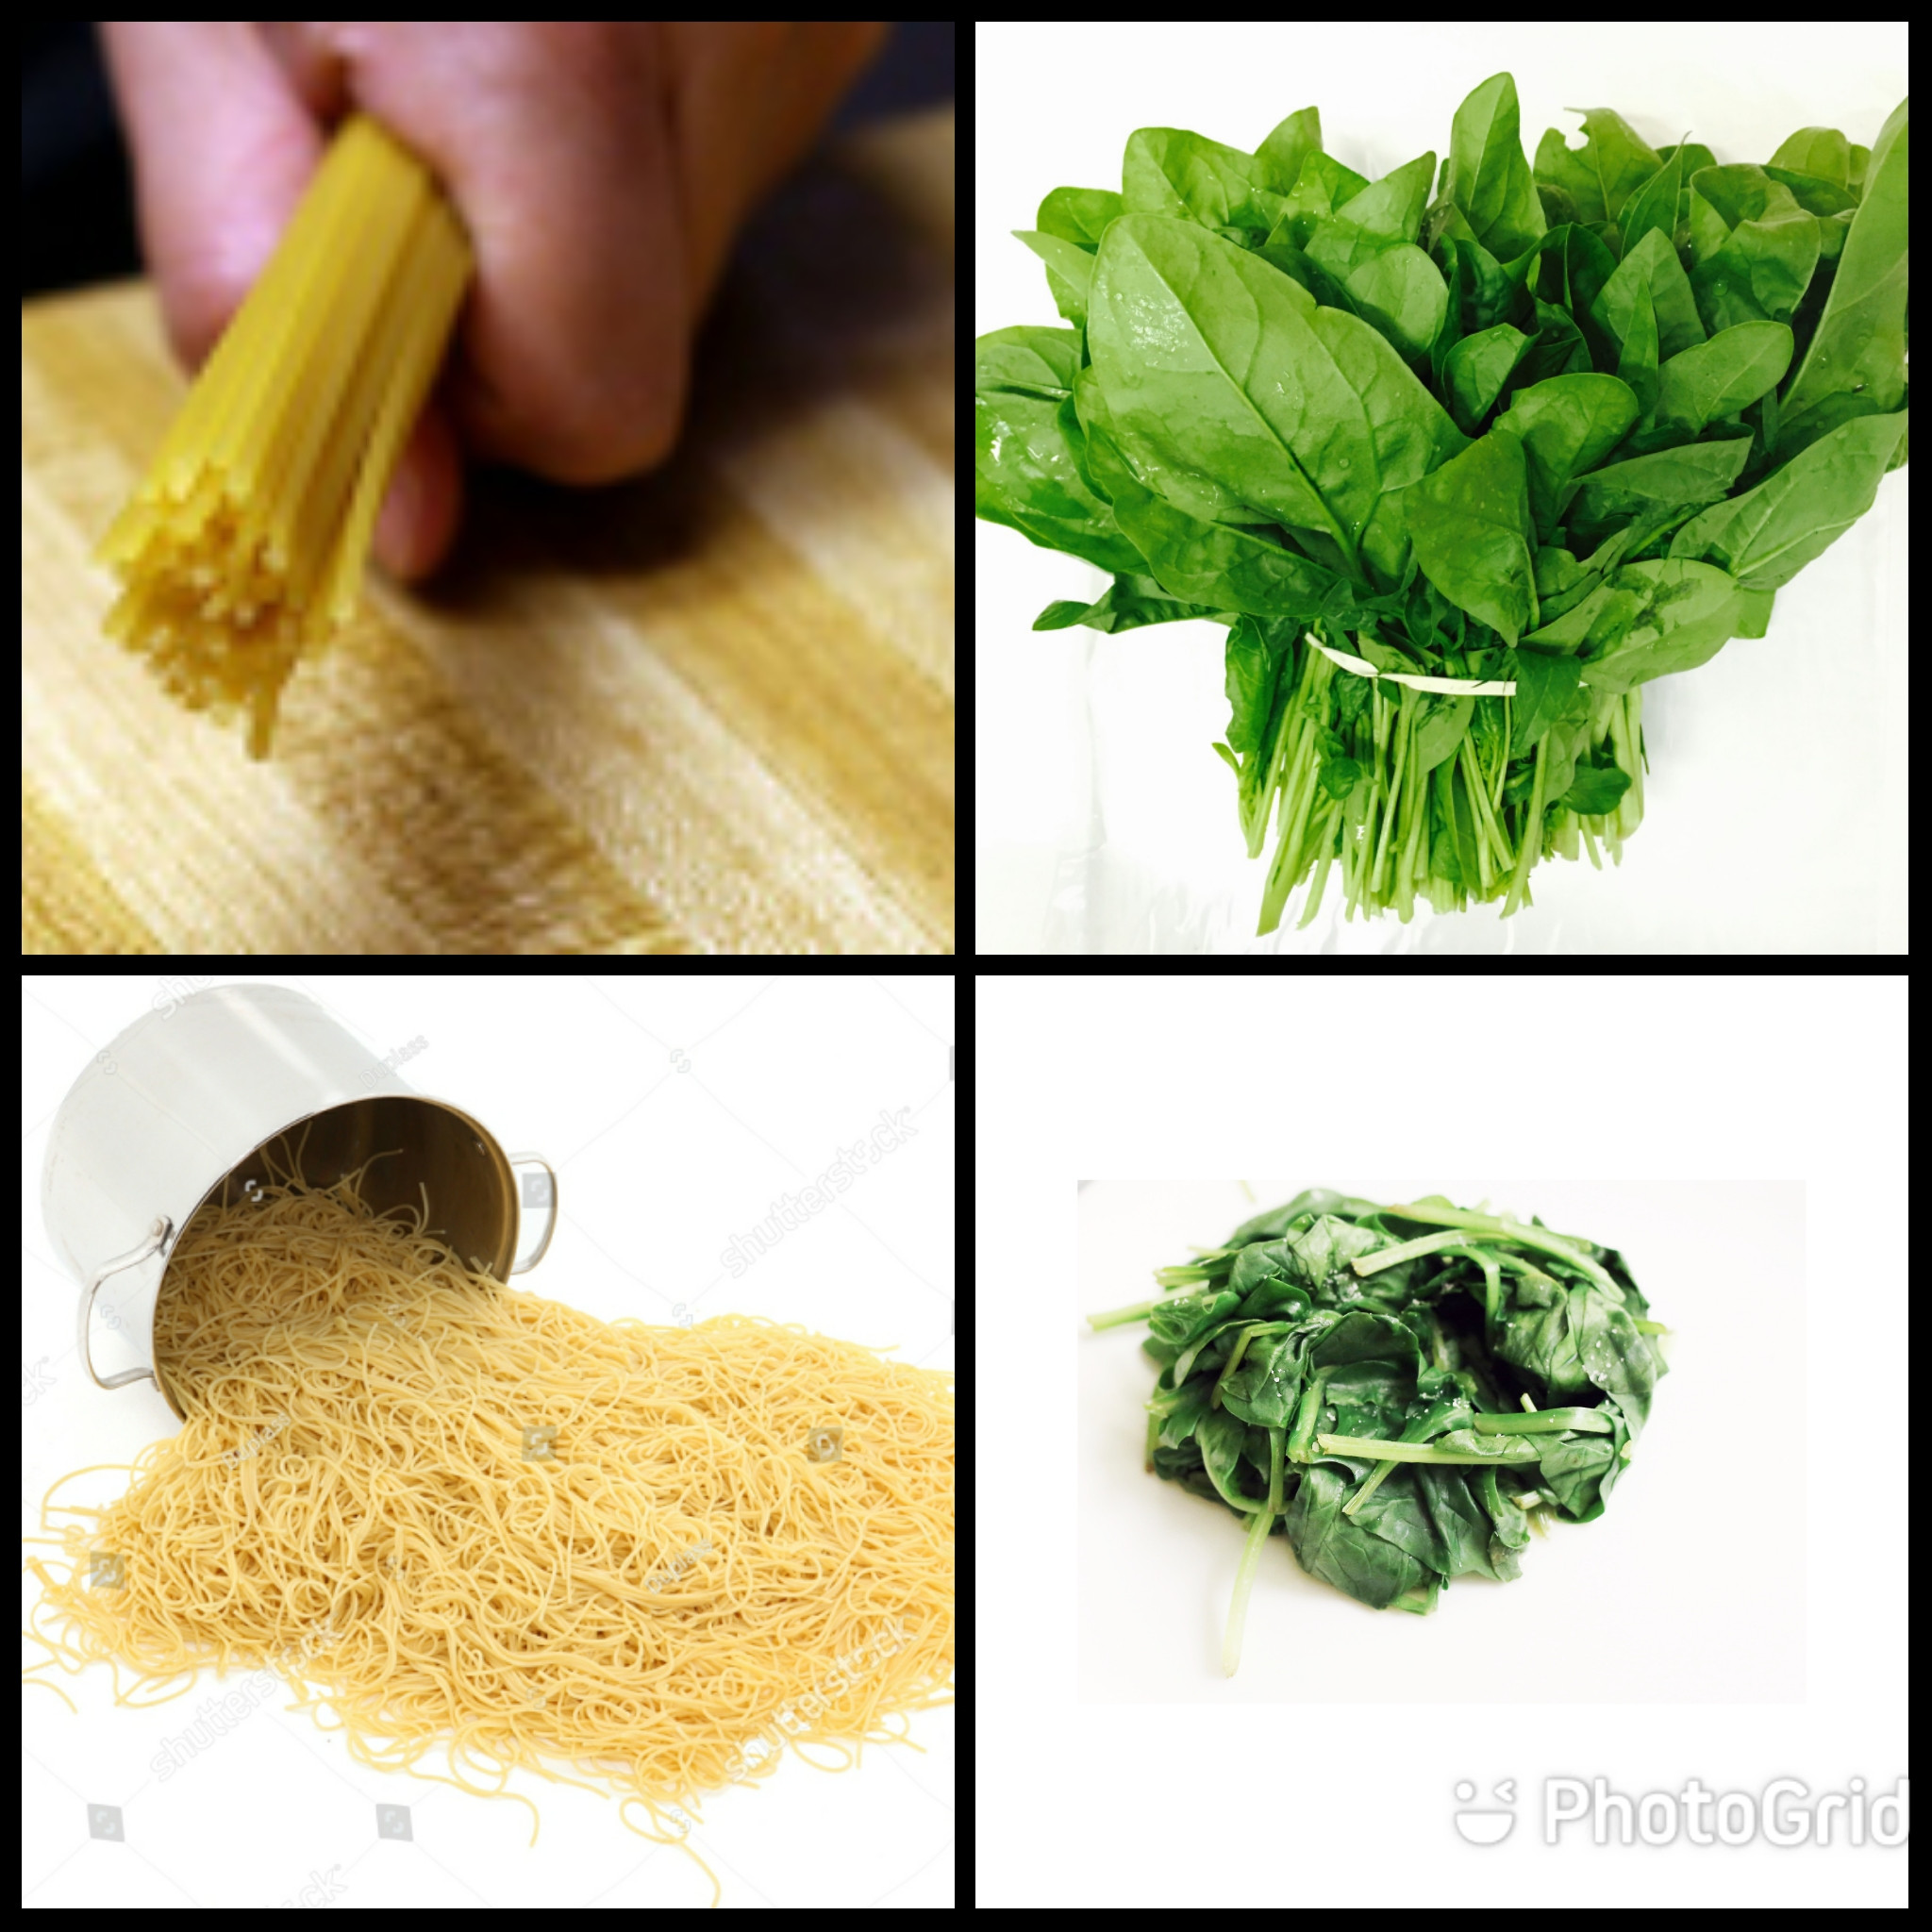 The pasta spinach paradox is delicious, whichever way you look at it.